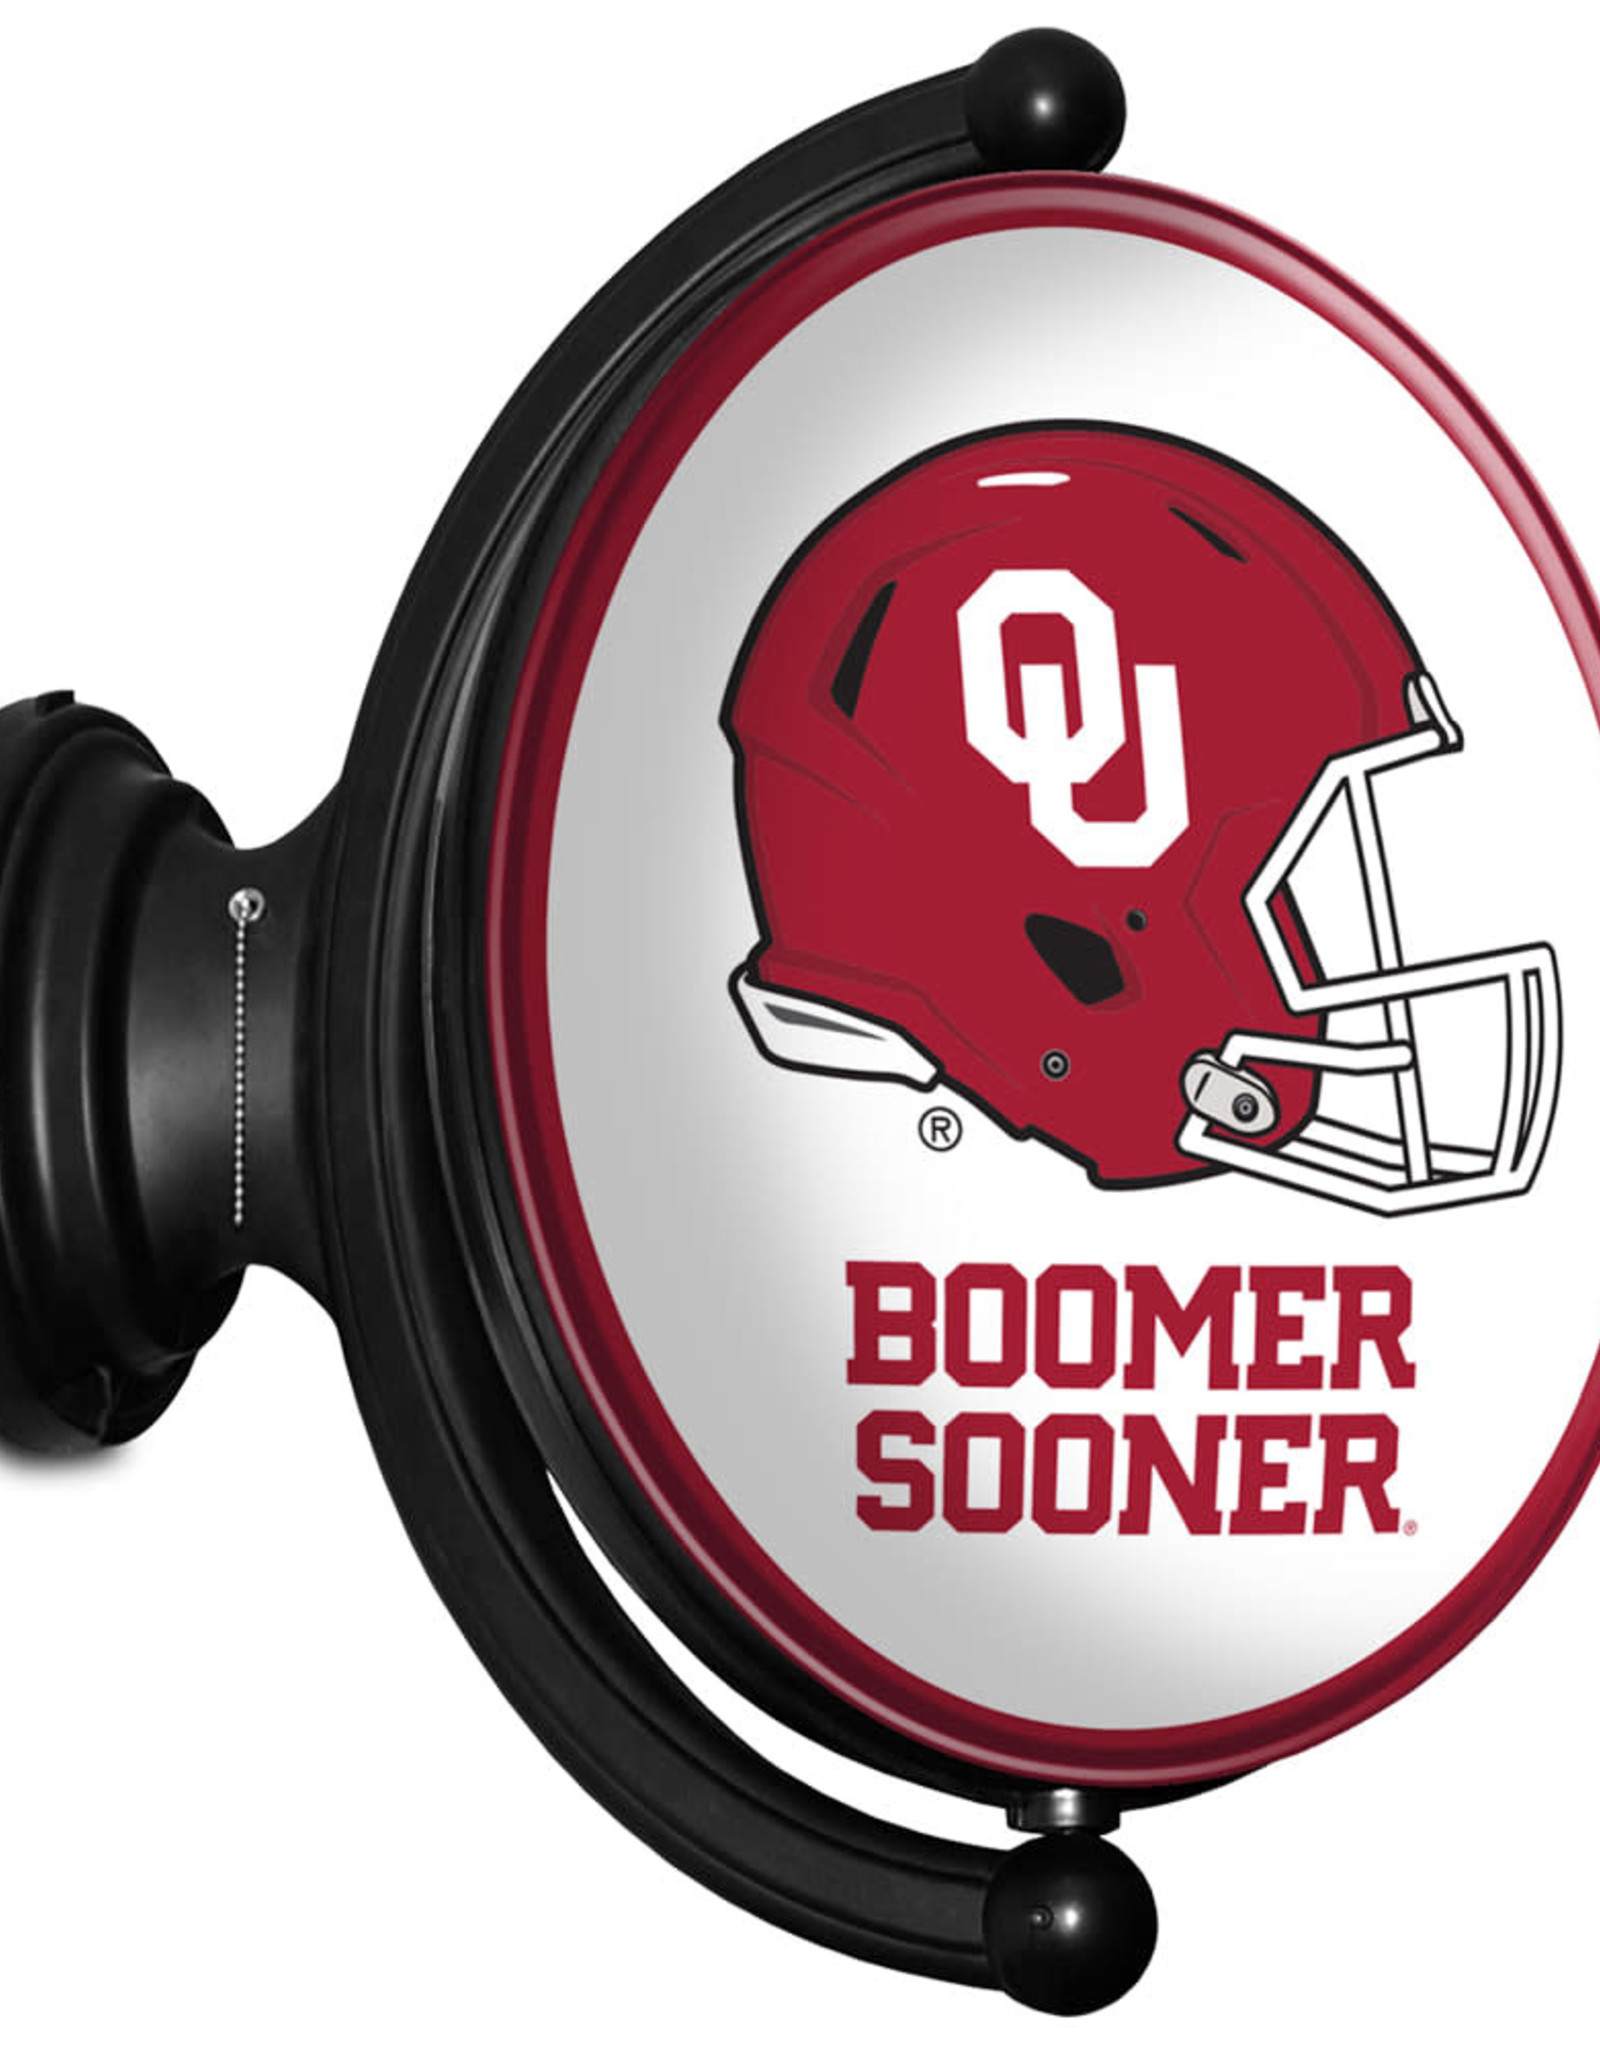 Grimm Rotating Oval Bubble OU Helmet Lighted Sign (online store)